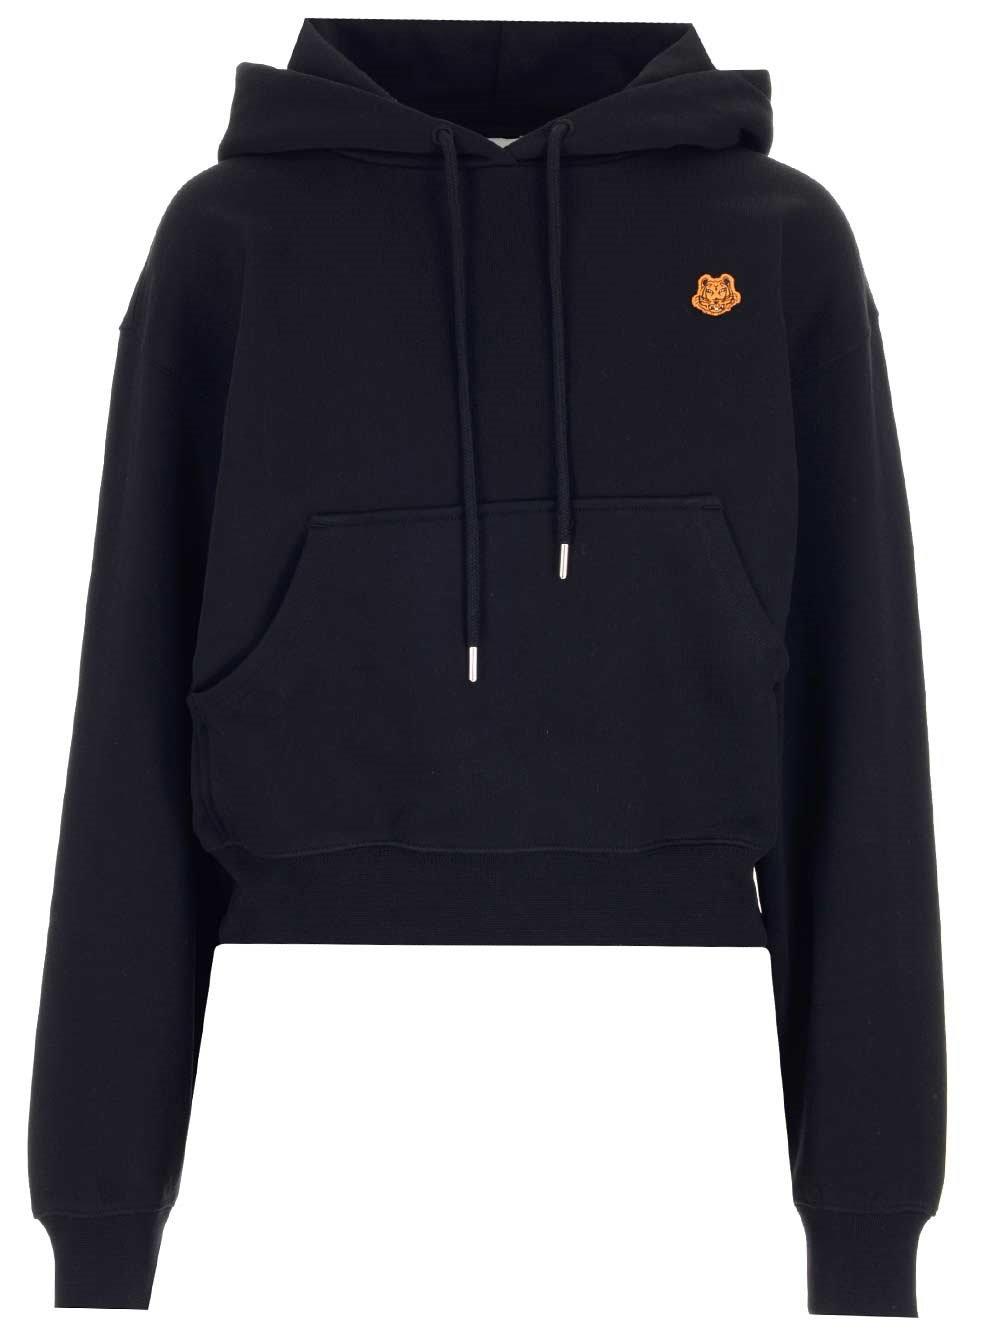 Tiger Crest Embroidered Drawstring Hoodie